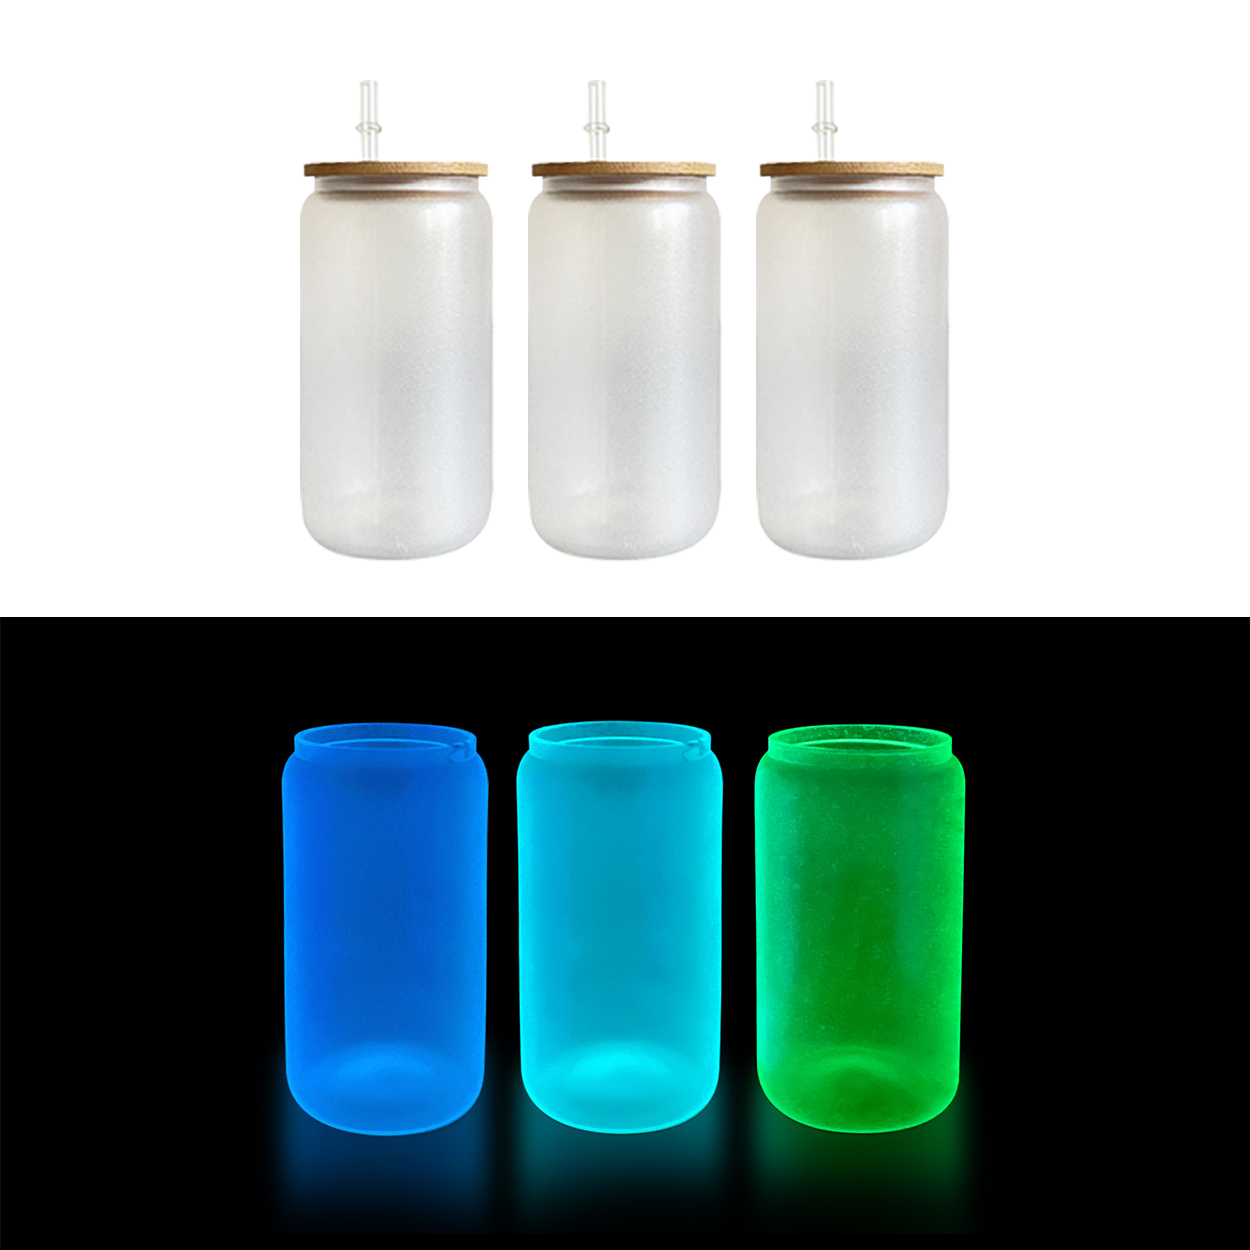 https://ibesin.com/wp-content/uploads/2022/08/Sublimation-Glow-in-the-Dark-Glass-Can.jpg